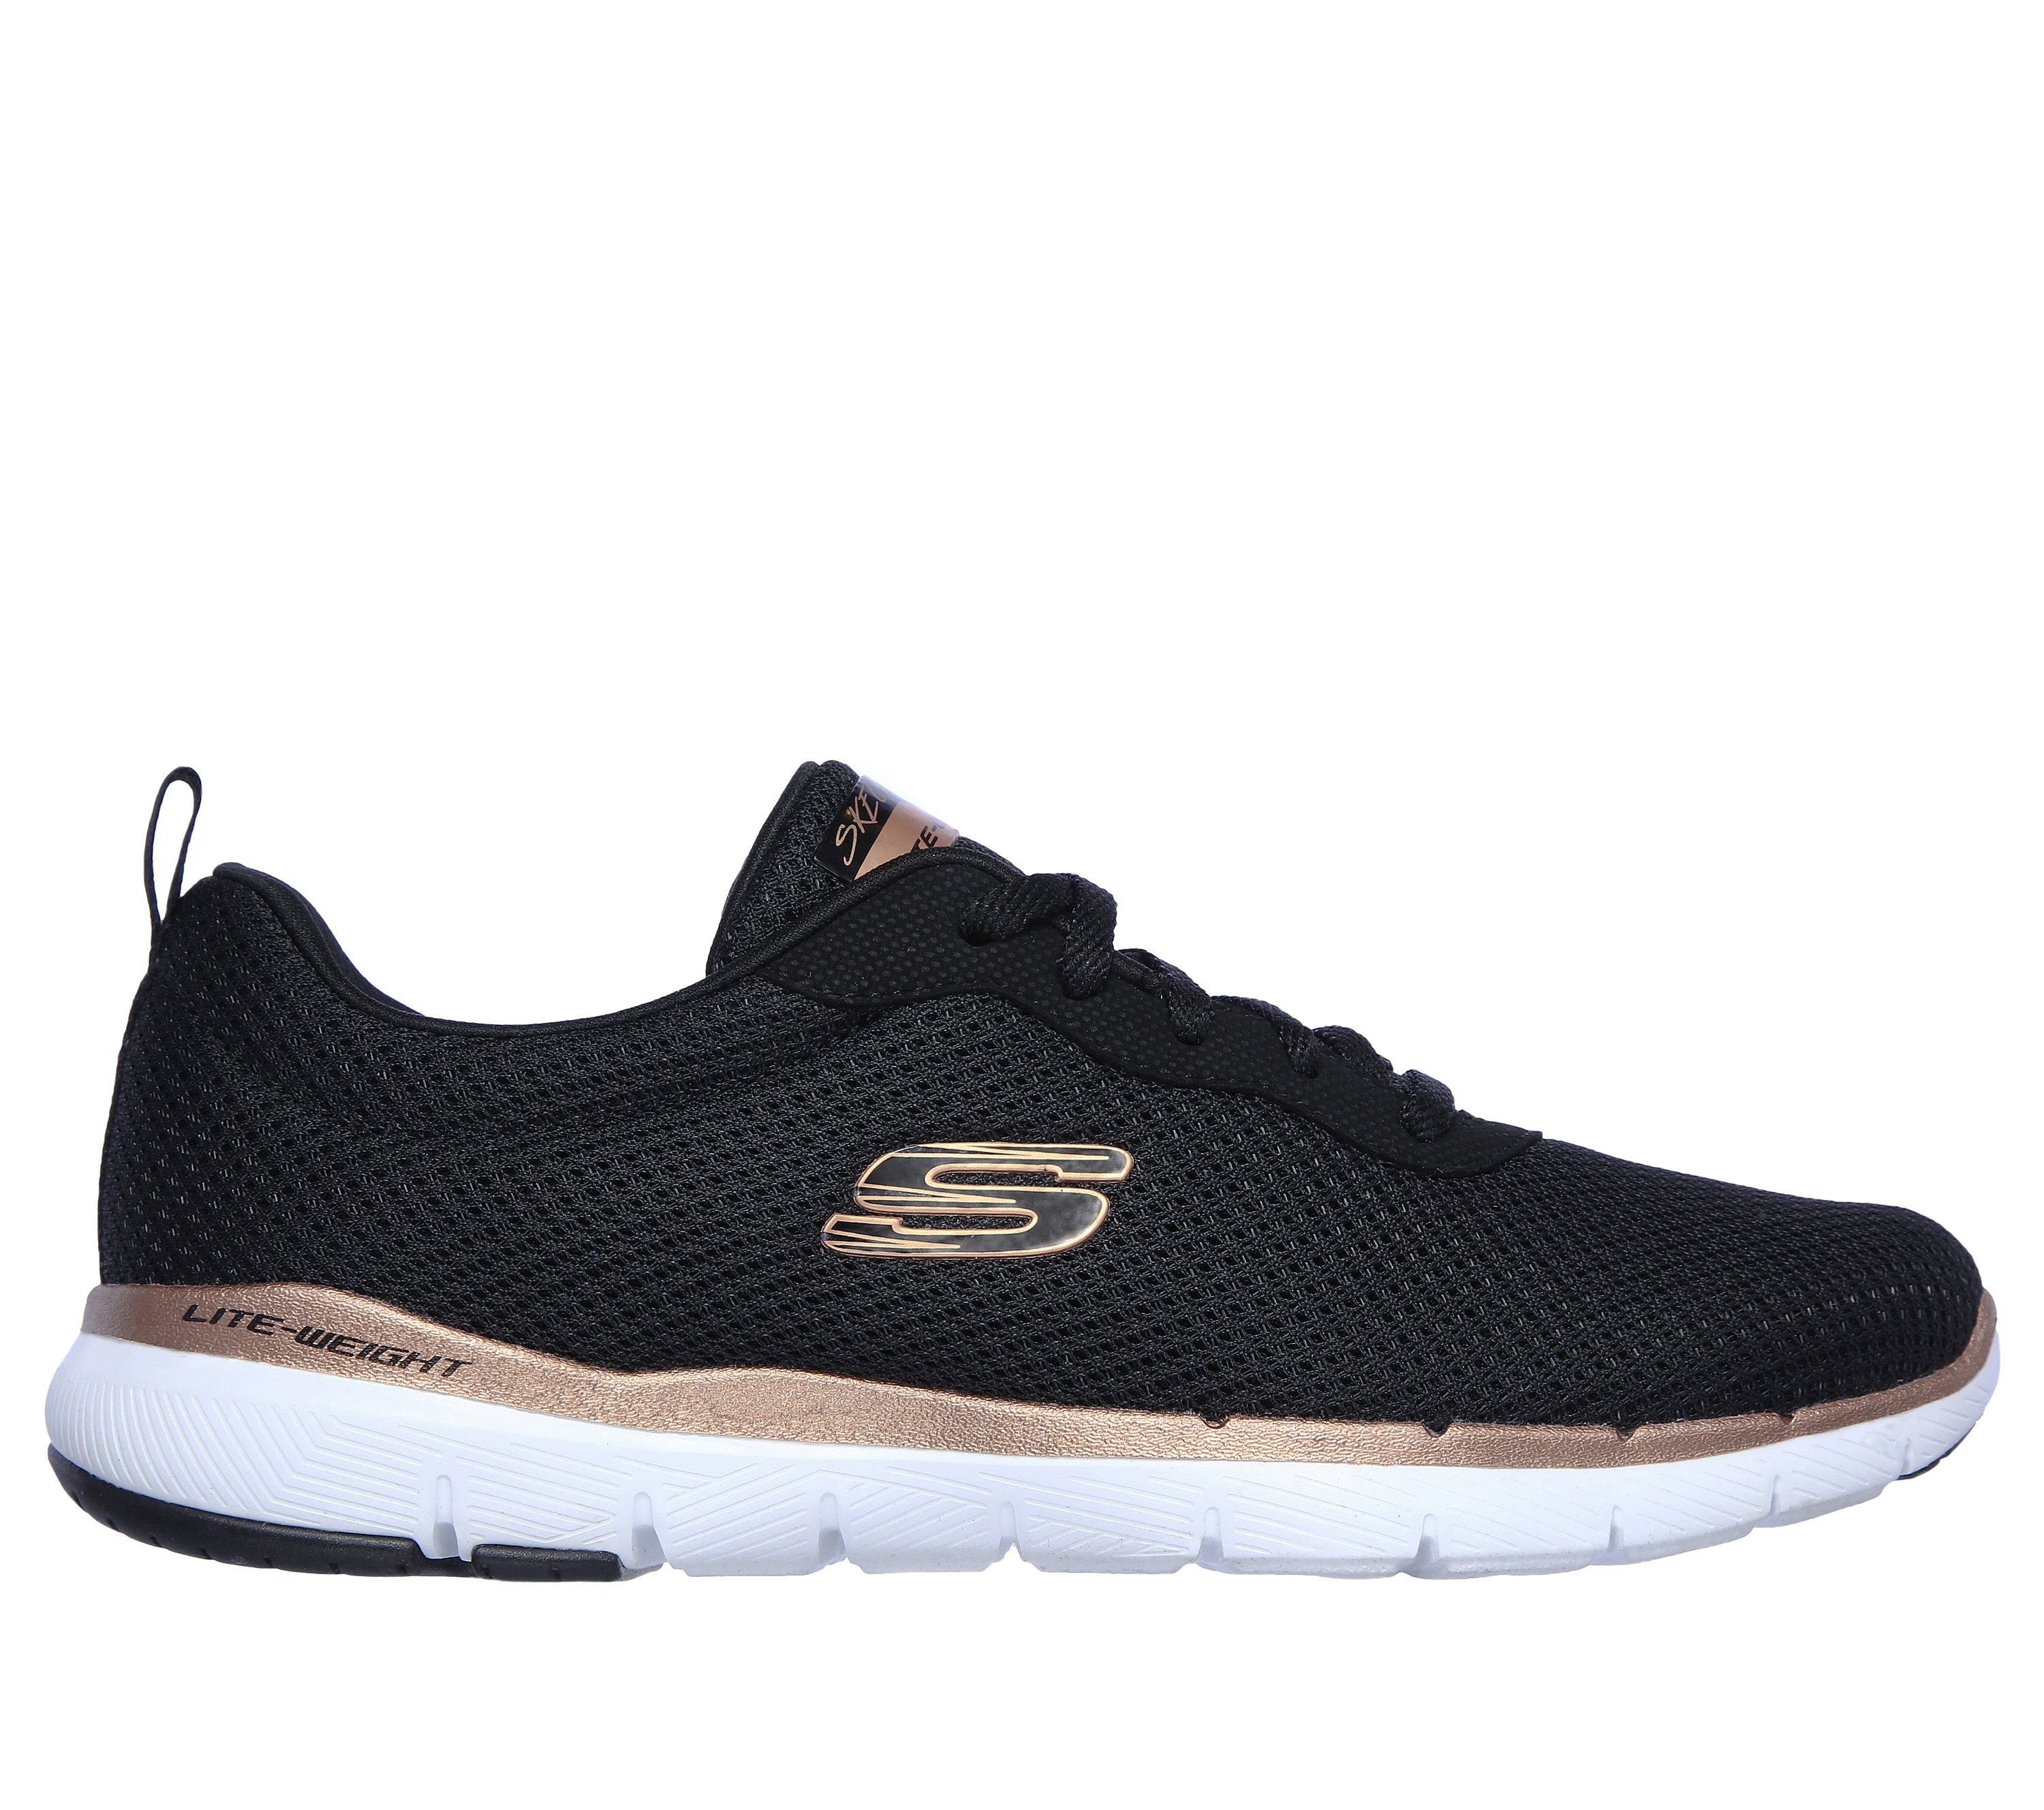 Shop the Flex Appeal 3.0 - First Insight | SKECHERS